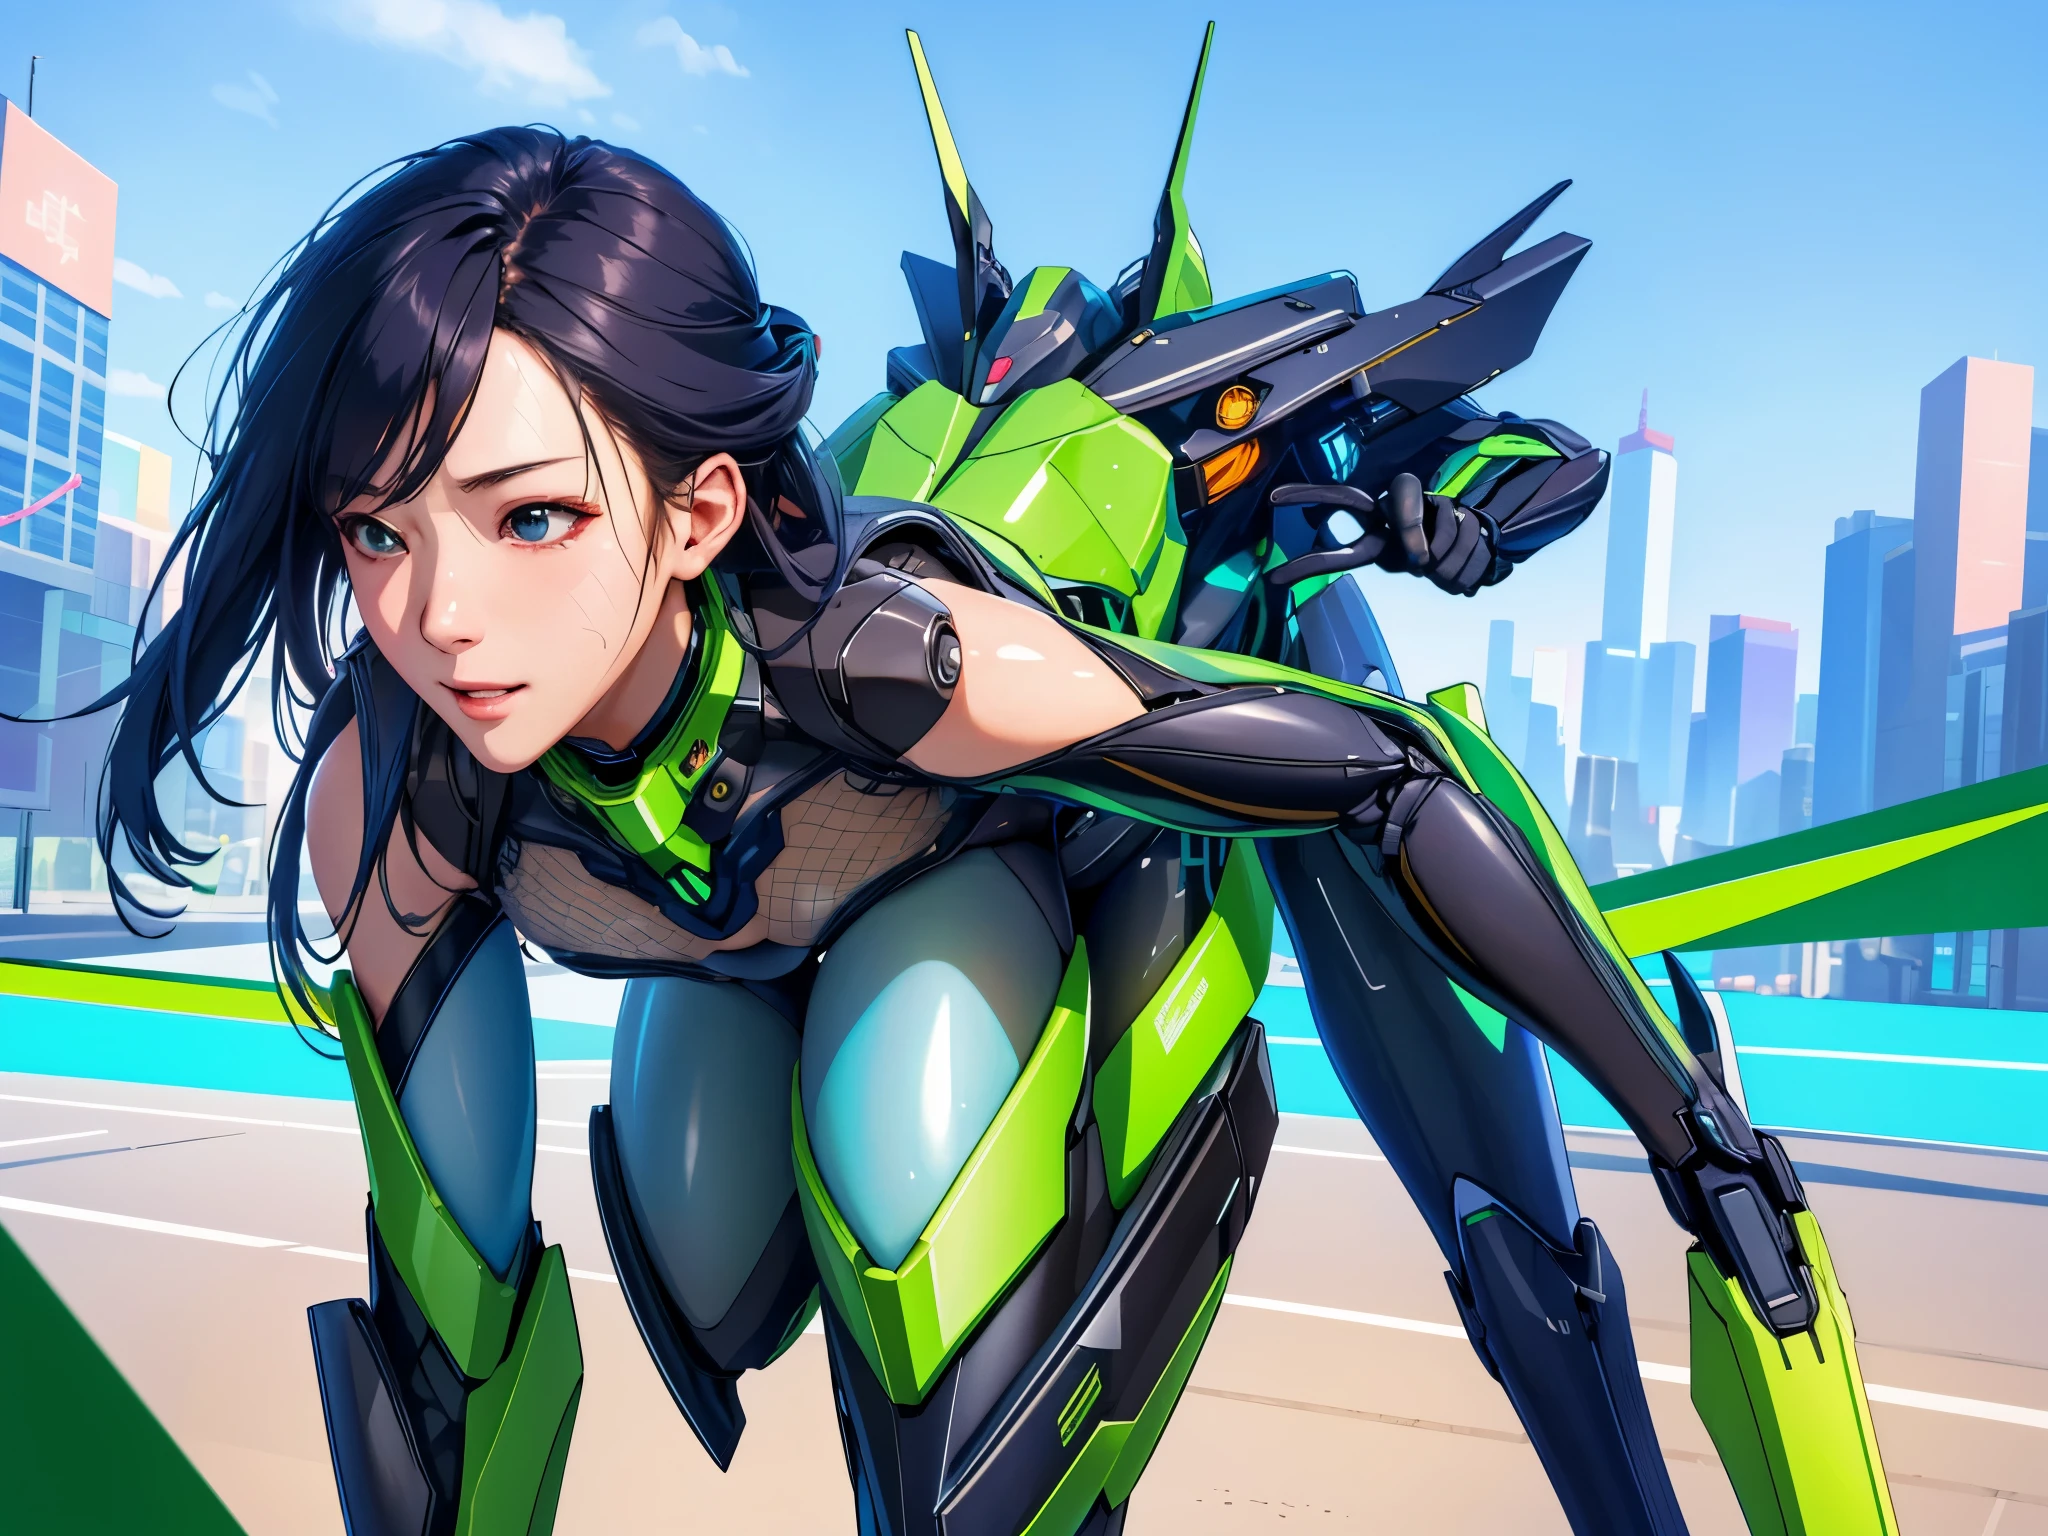 Highest image quality, excellent detail, Ultra-high resolution, (Realistic: 1.4), The best illustrations, Offer details, Highly concentrated 1girl, Has a delicate and beautiful face, Dressed in black and green mechs, wearing a mech helmet, holding direction, riding motorcycles, The background is a high-tech light scene of the future city. 超Realistic插画, 超Realistic渲染, clean digital render, photo realistic render, 超Realistic插画